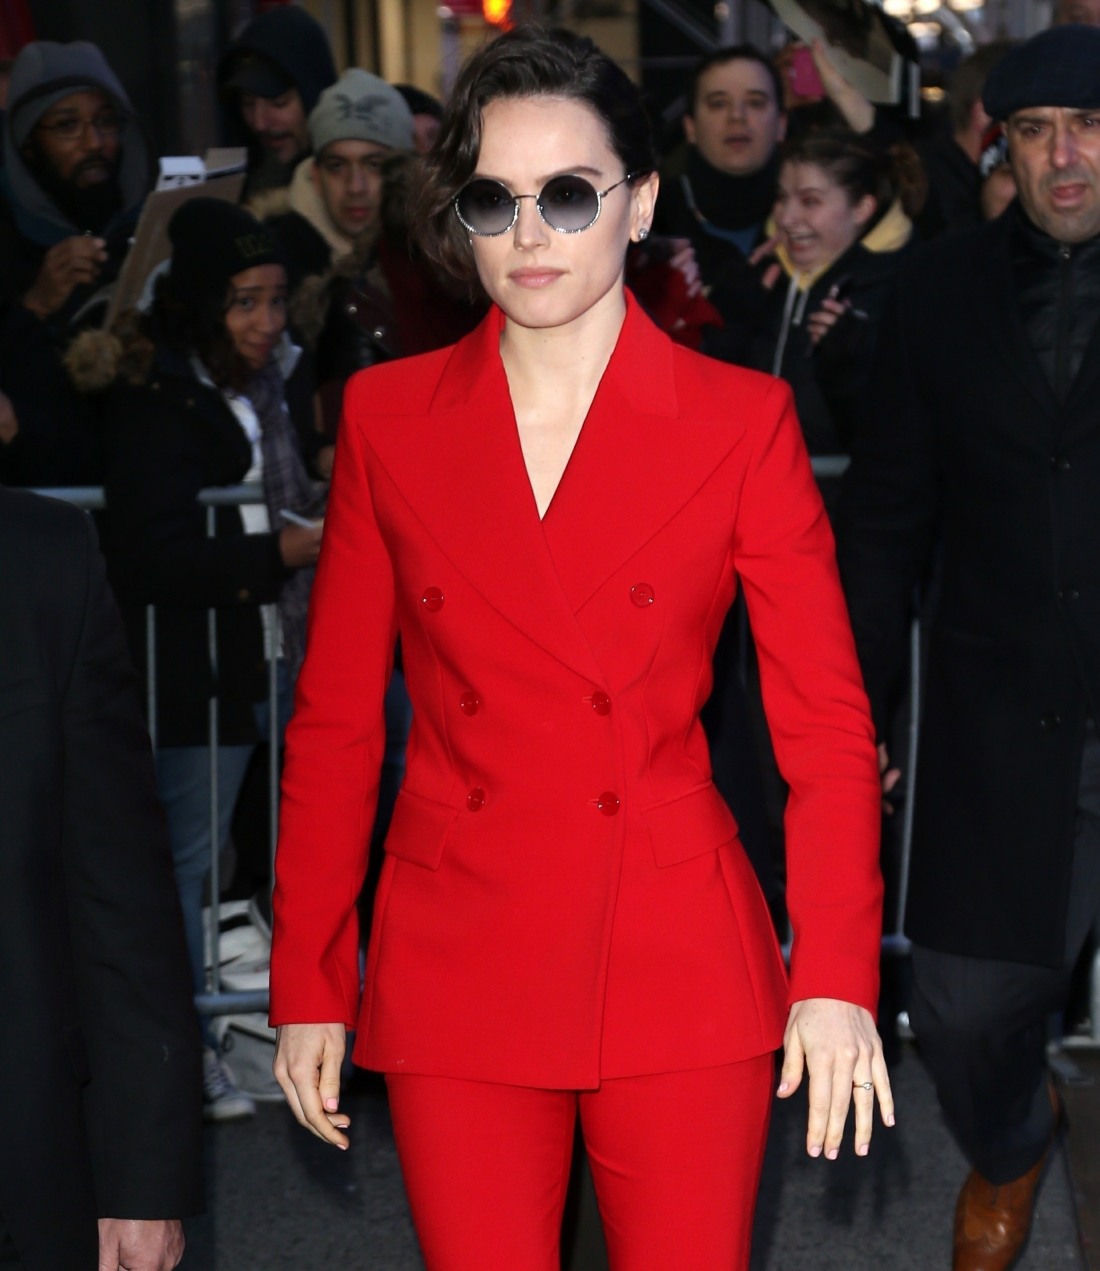 Daisy Ridley stands out in bright red at Good Morning America